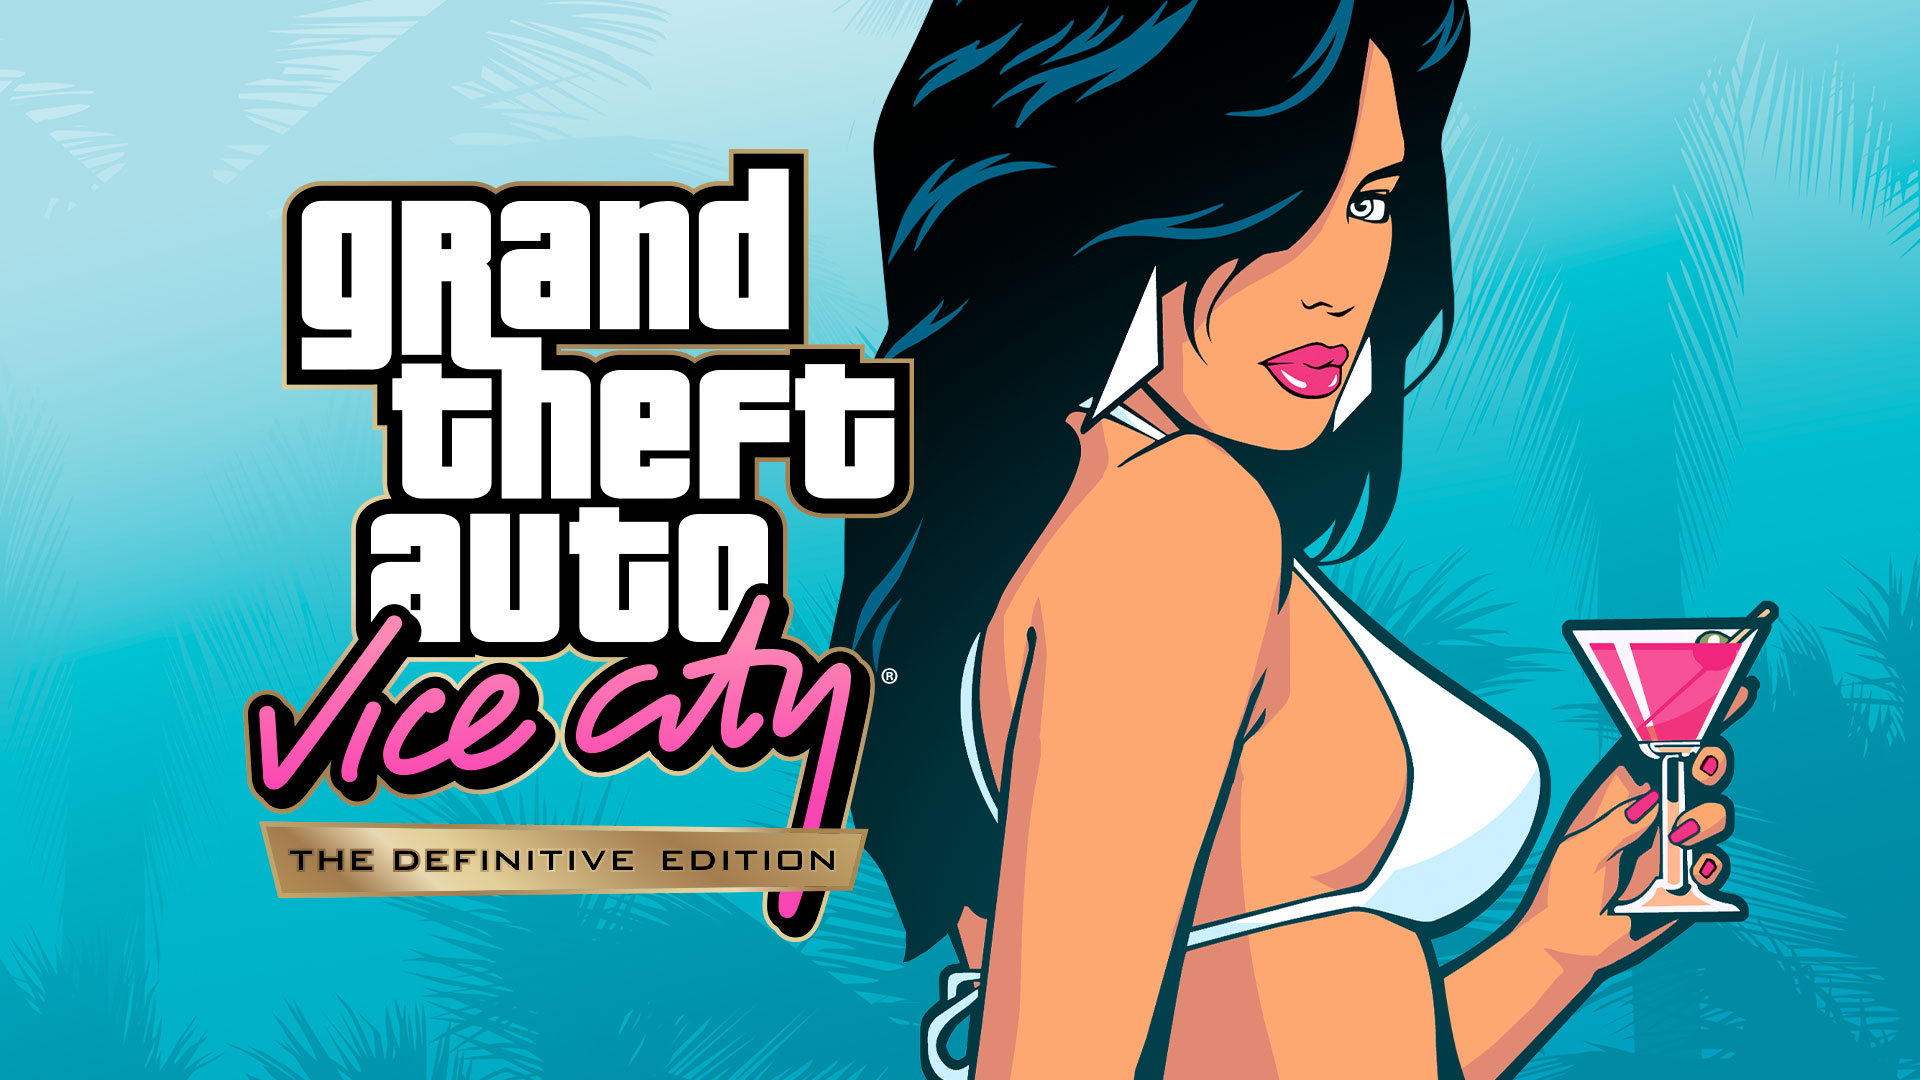 Grand Theft Auto: Vice City – The Definitive Edition